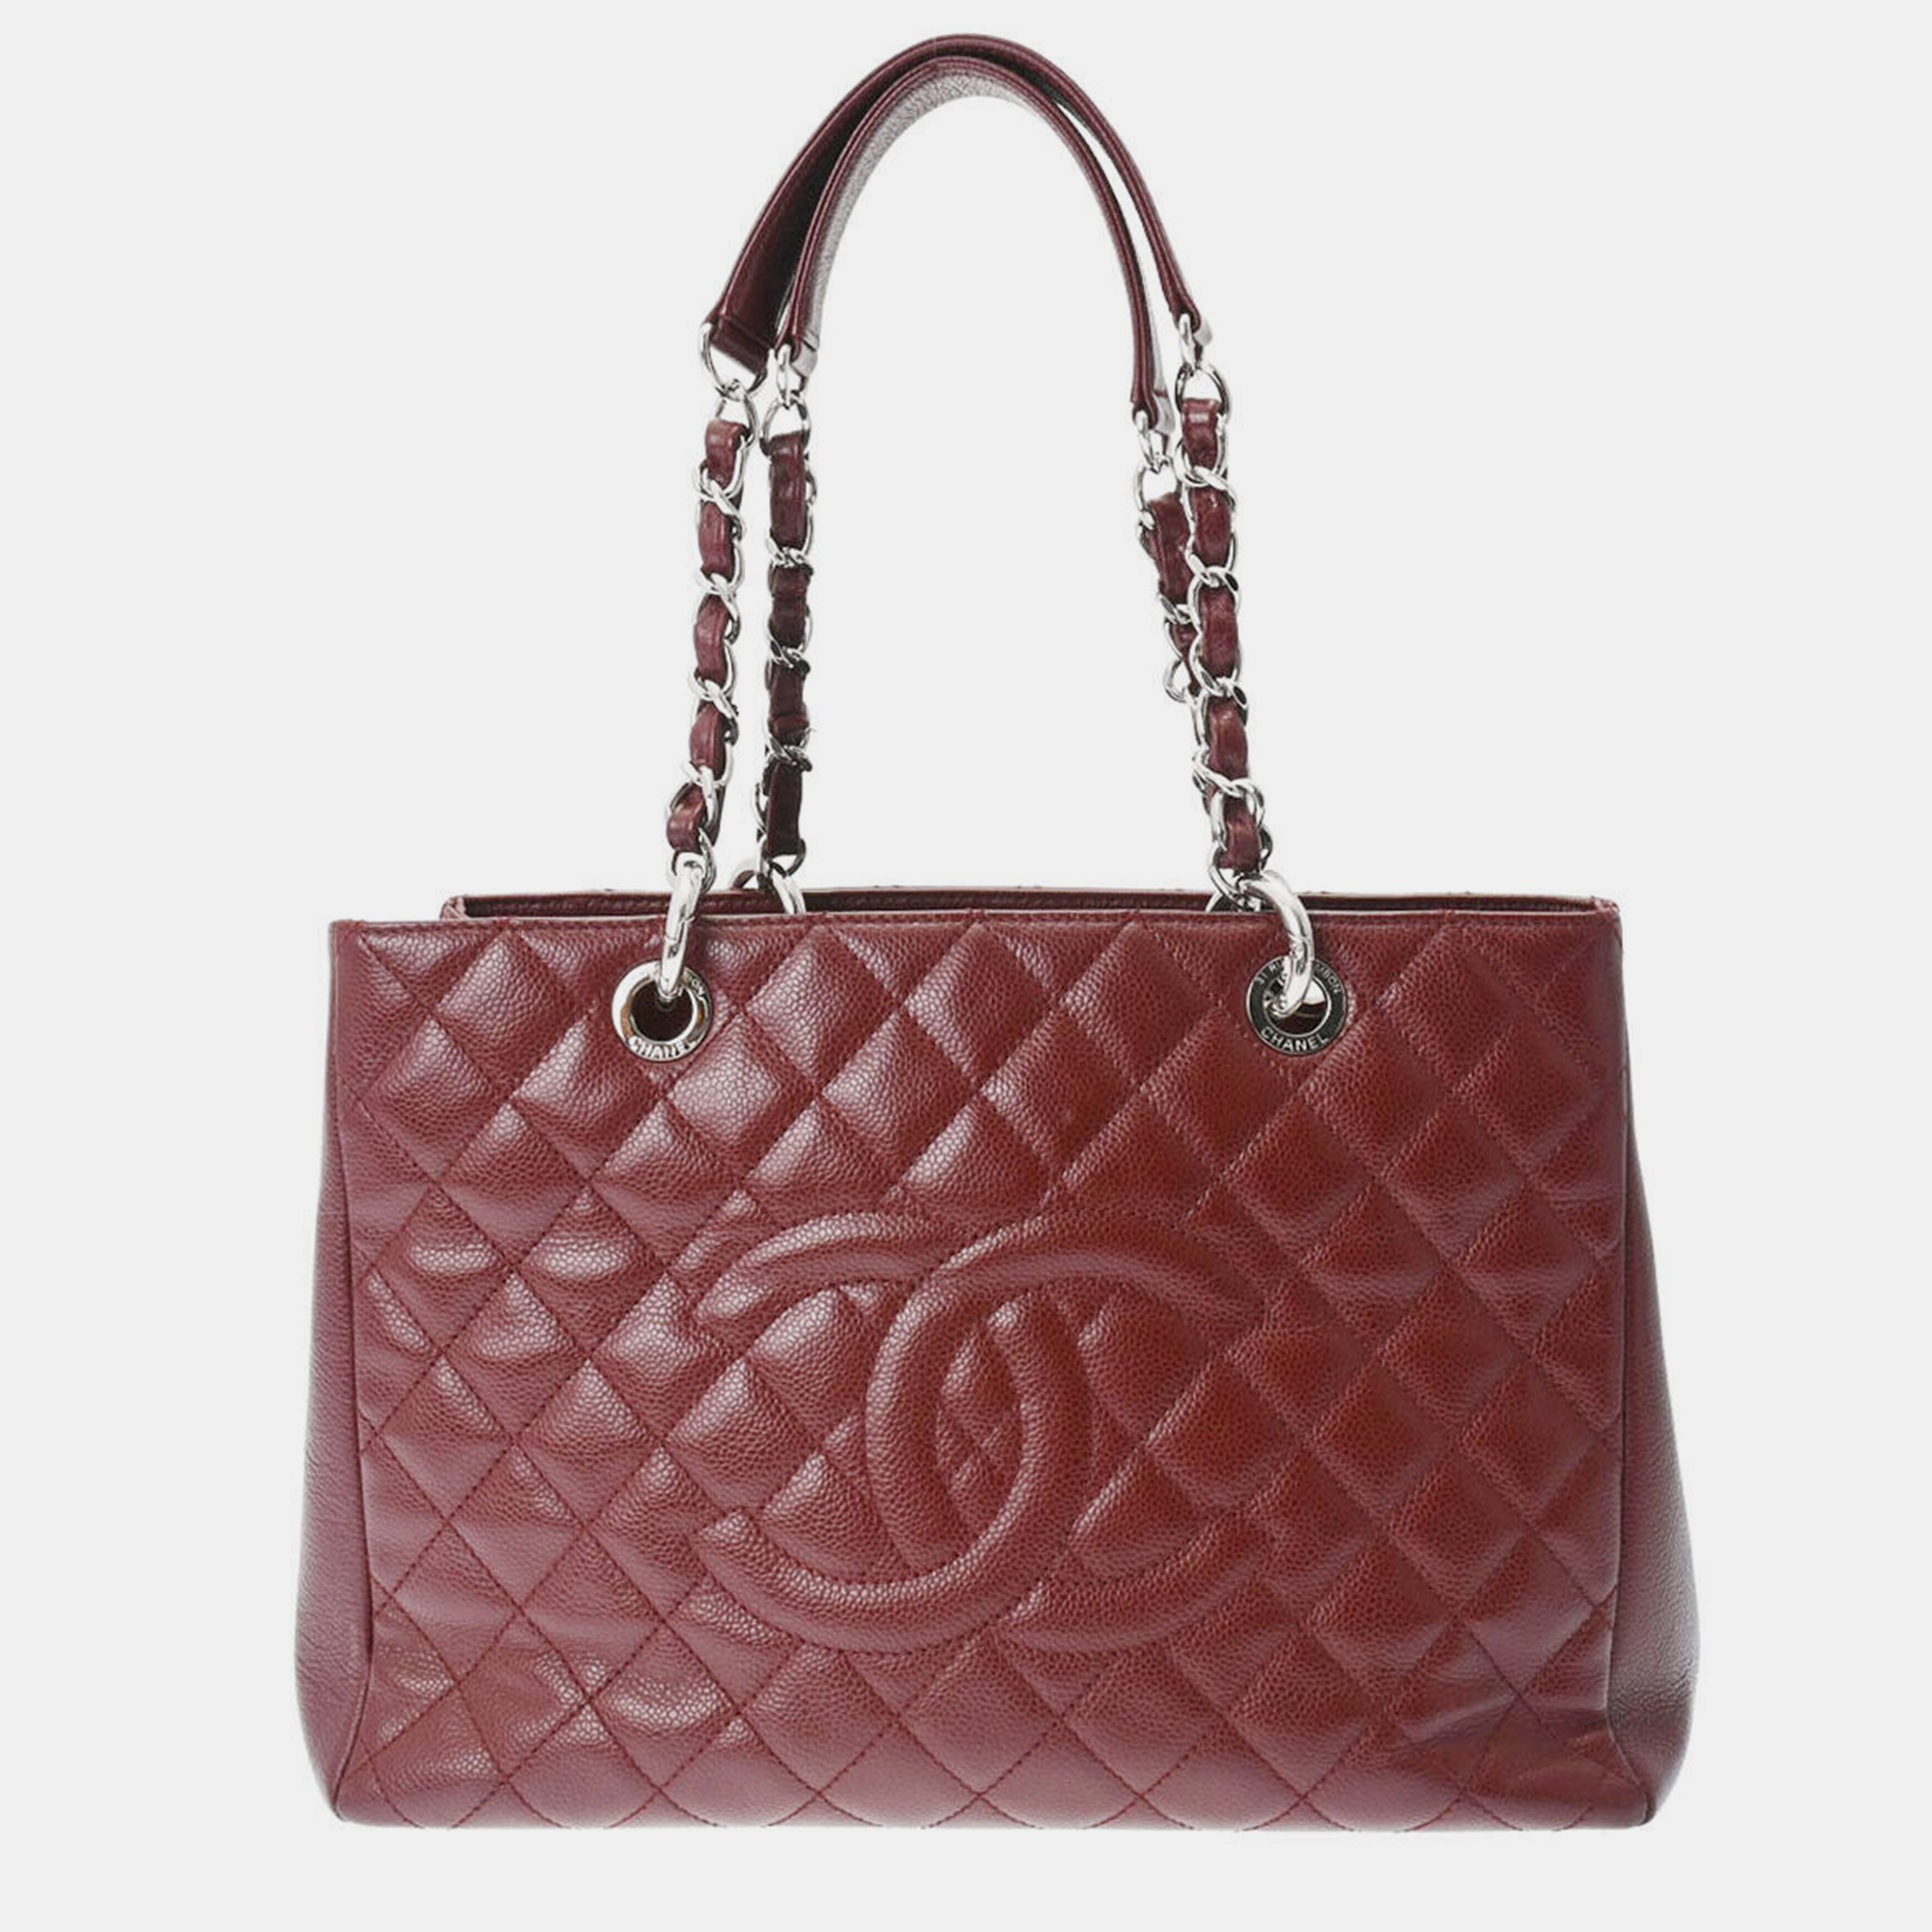 Chanel red caviar leather xl gst totes